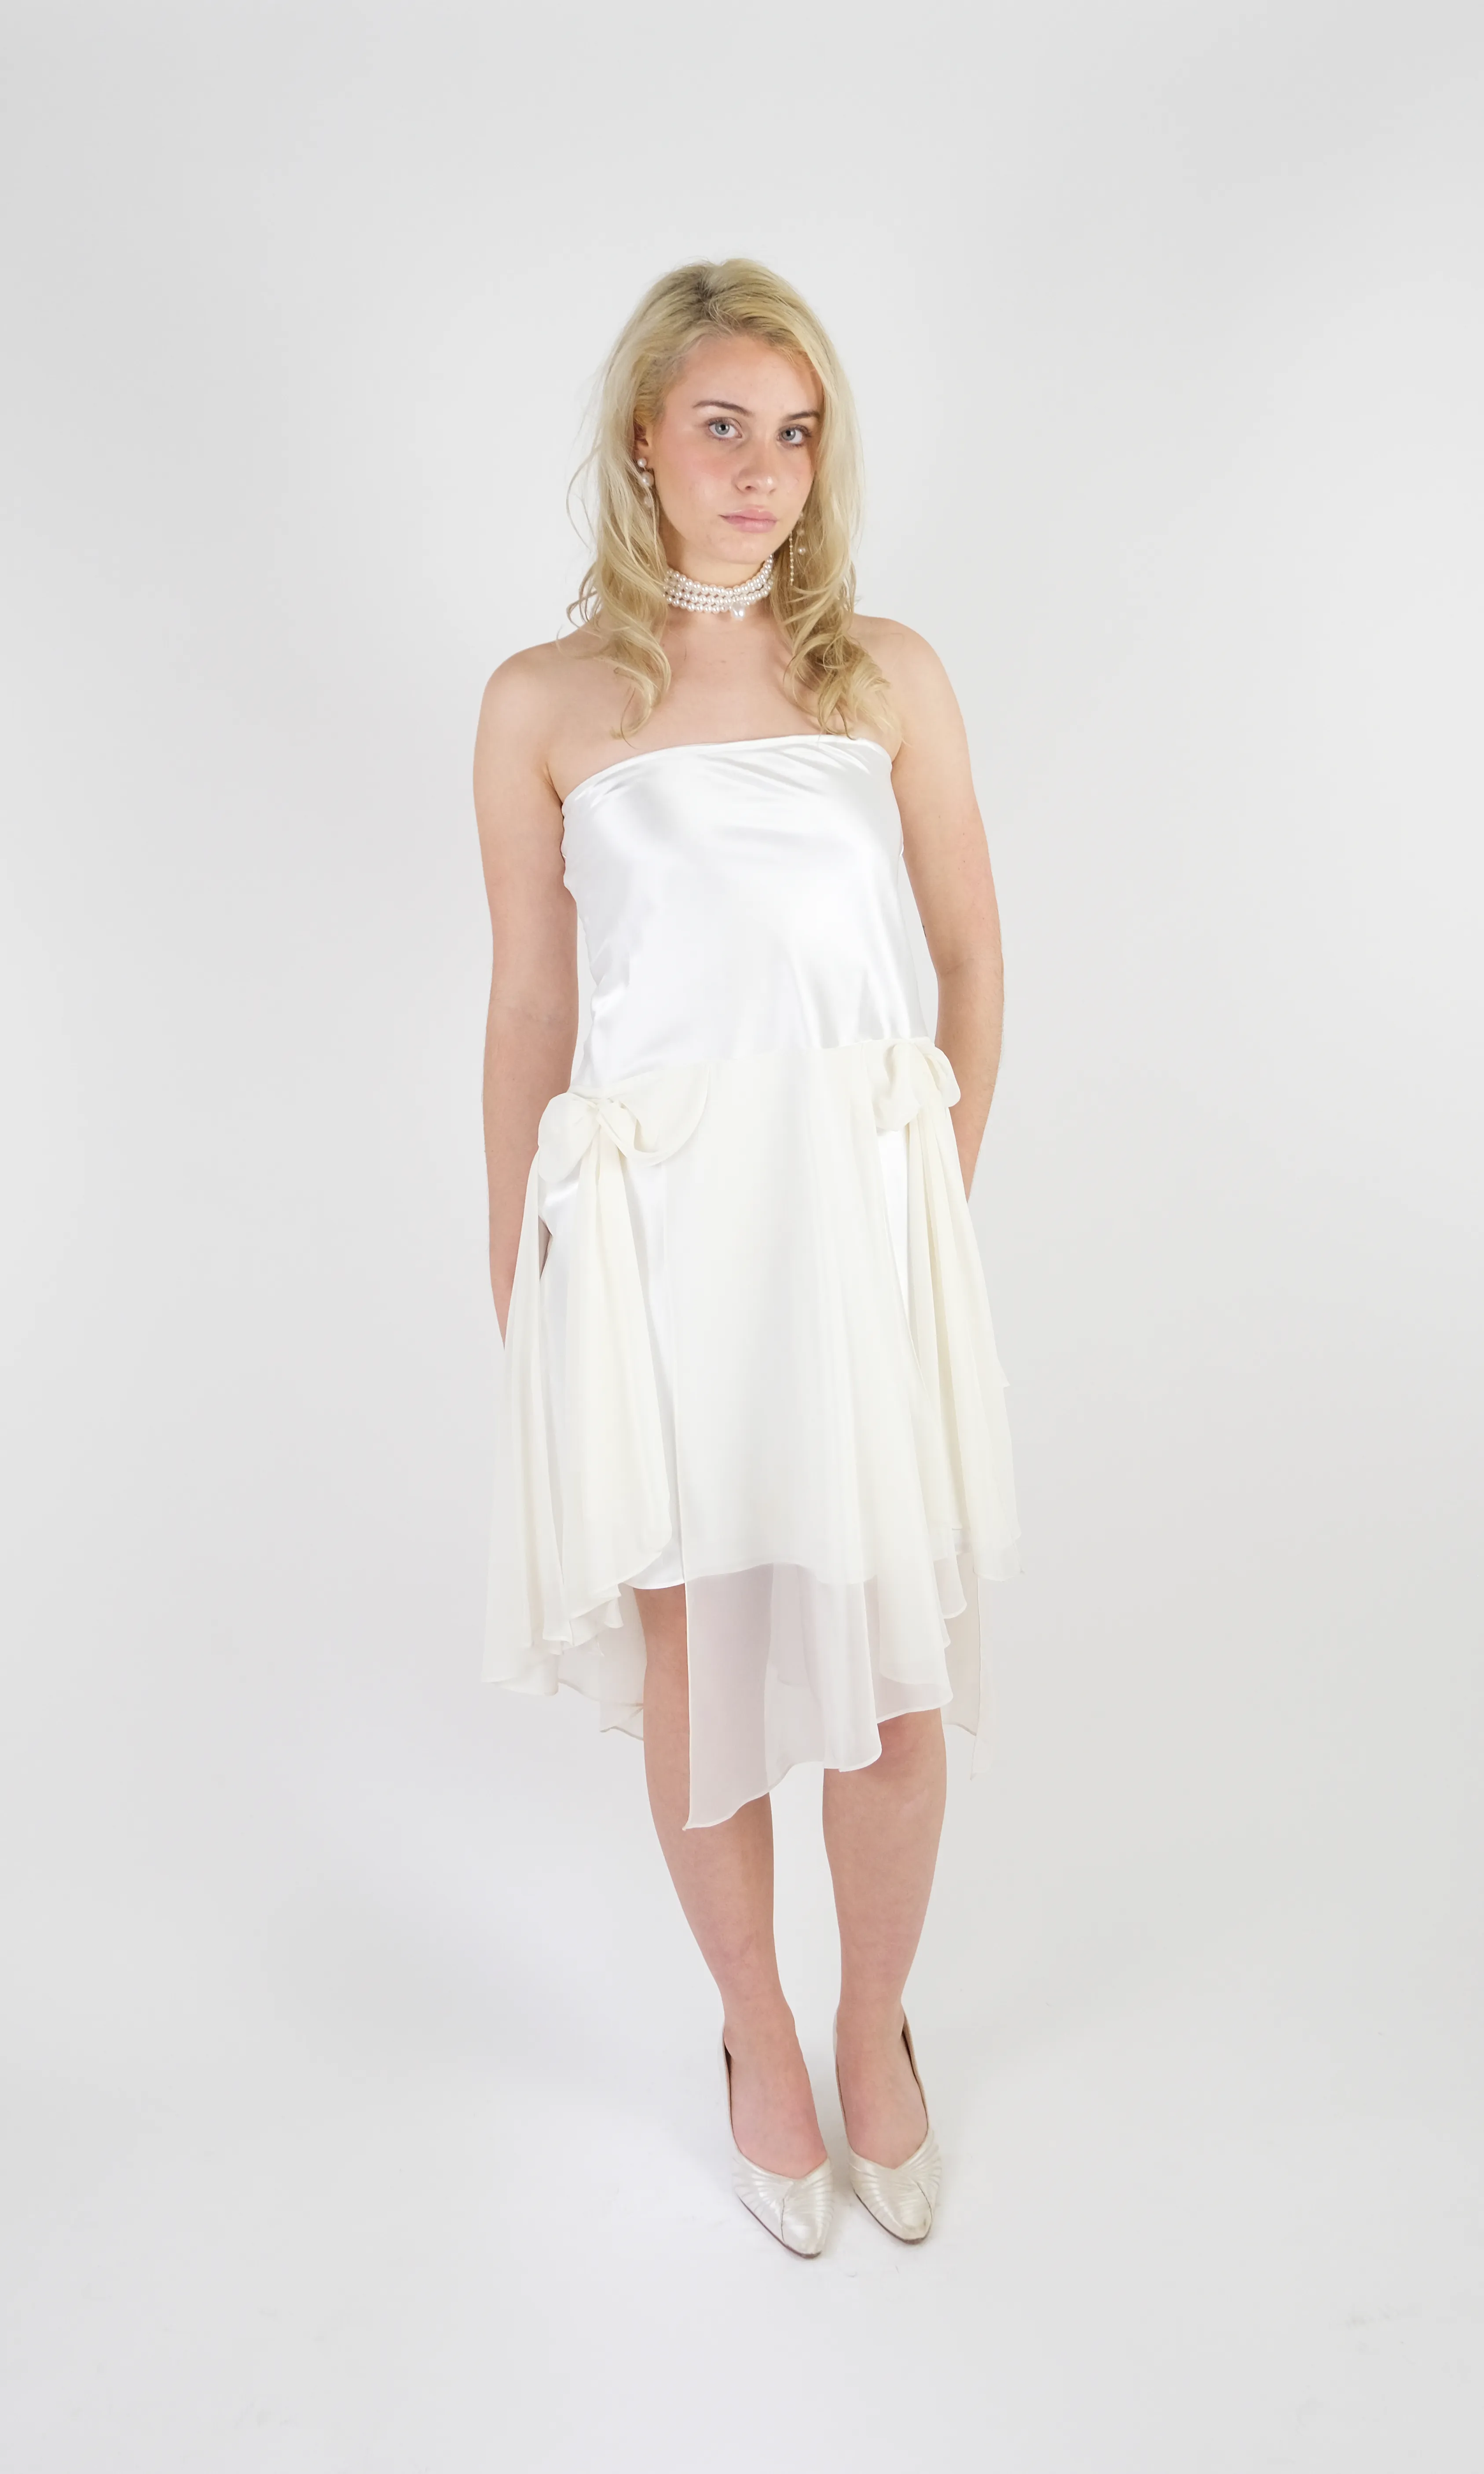 Icicle Strapless Dress